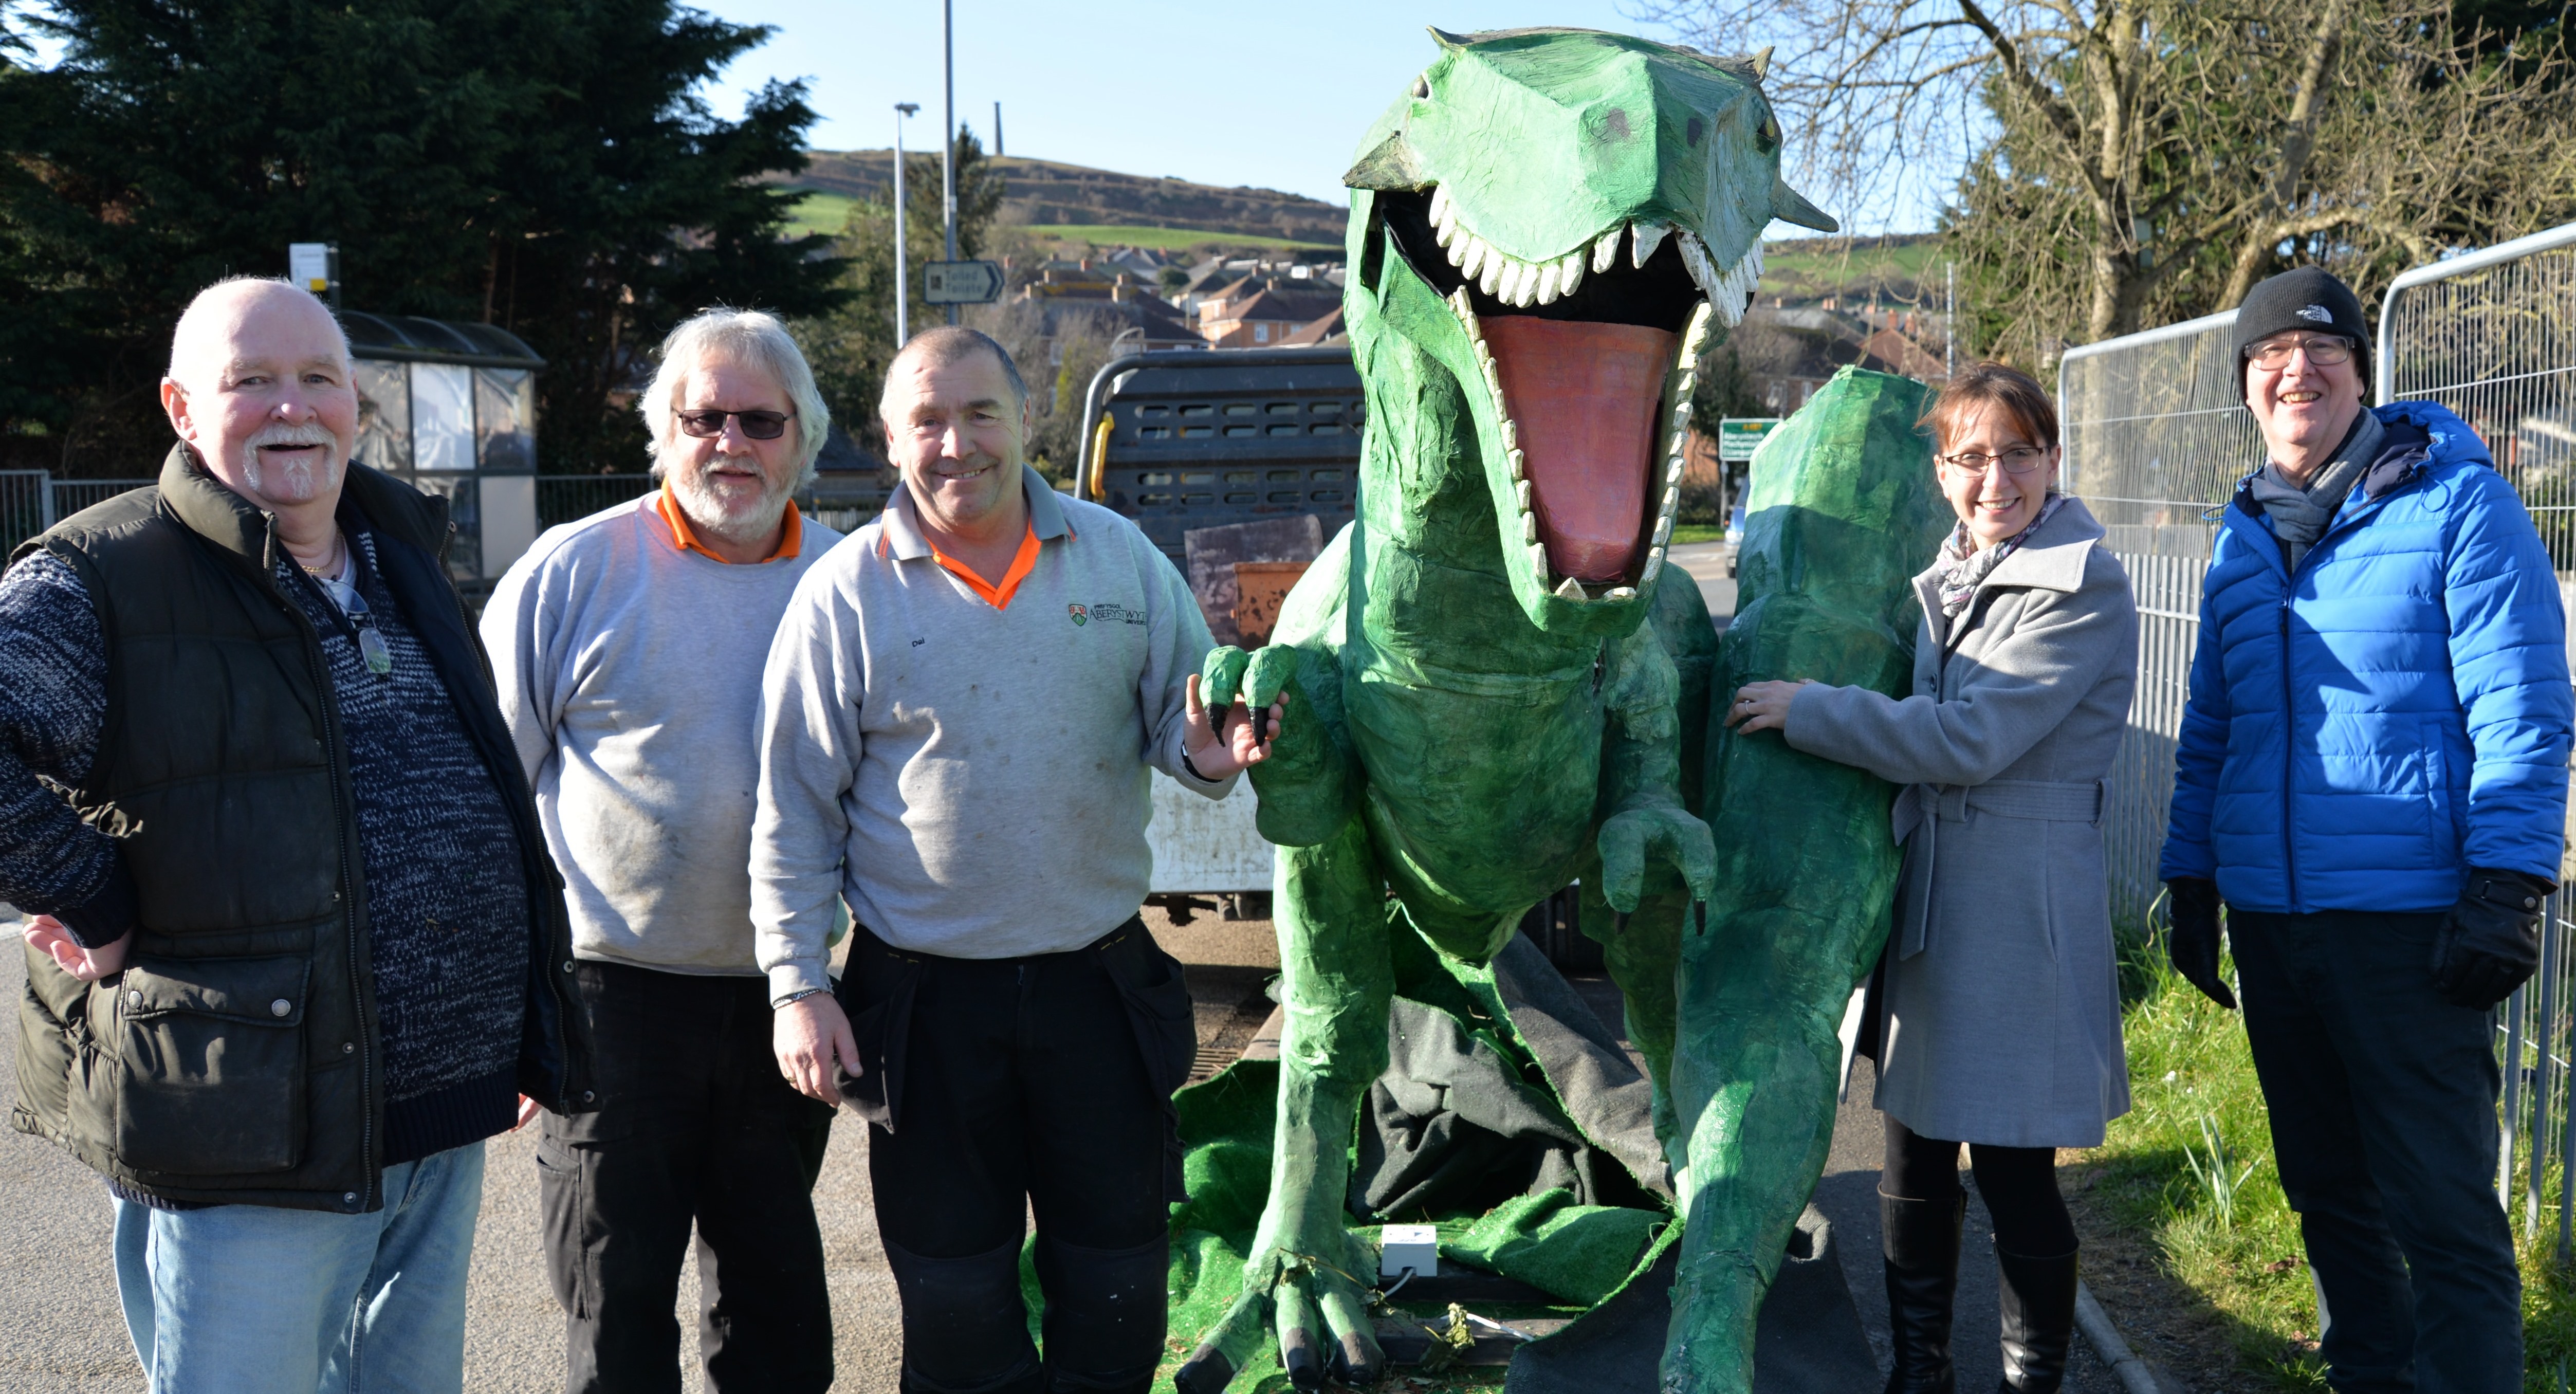 Dave the Dinosaur making his way from Penparcau Community Forum’s offices to Old College accompanied by (left to right) George Barratt, Penparcau Forum, Jeff Dowse and Dai Gornall from Aberystwyth University’s Property Services Team, Nia Davies, Aberystwyth University Old College Project and Bryn Jones, Penparcau Forum.